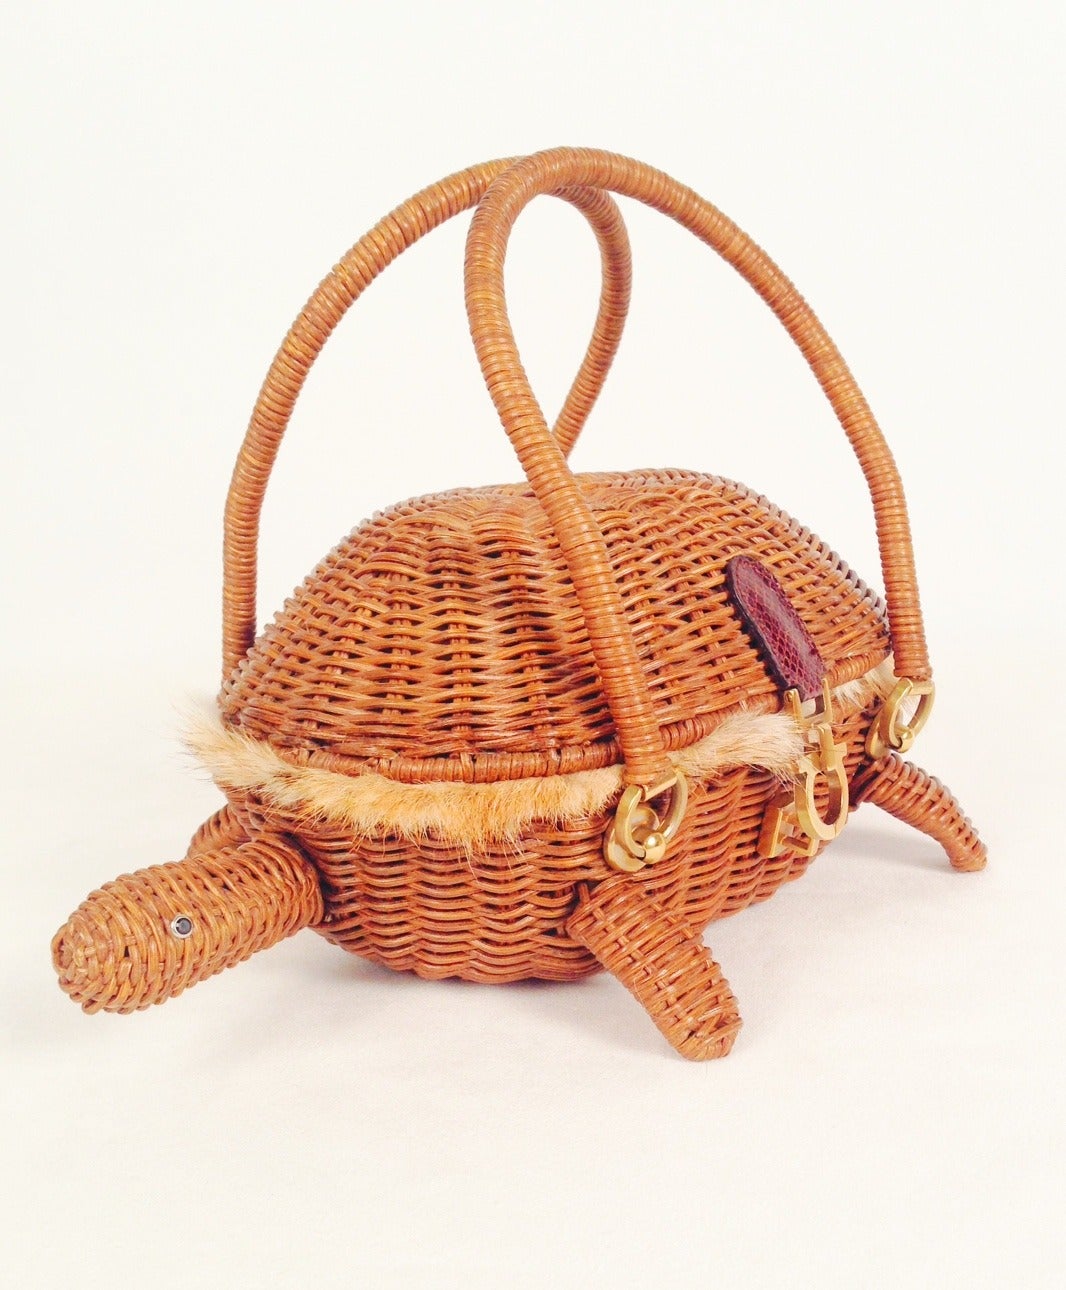 Salvatore Ferragamo Coyote Lined Wicker Turtle is whimsy defined!  Highly collectible and impossible to find, this delightful bag will amuse all admirers and start many conversations.  Signature 